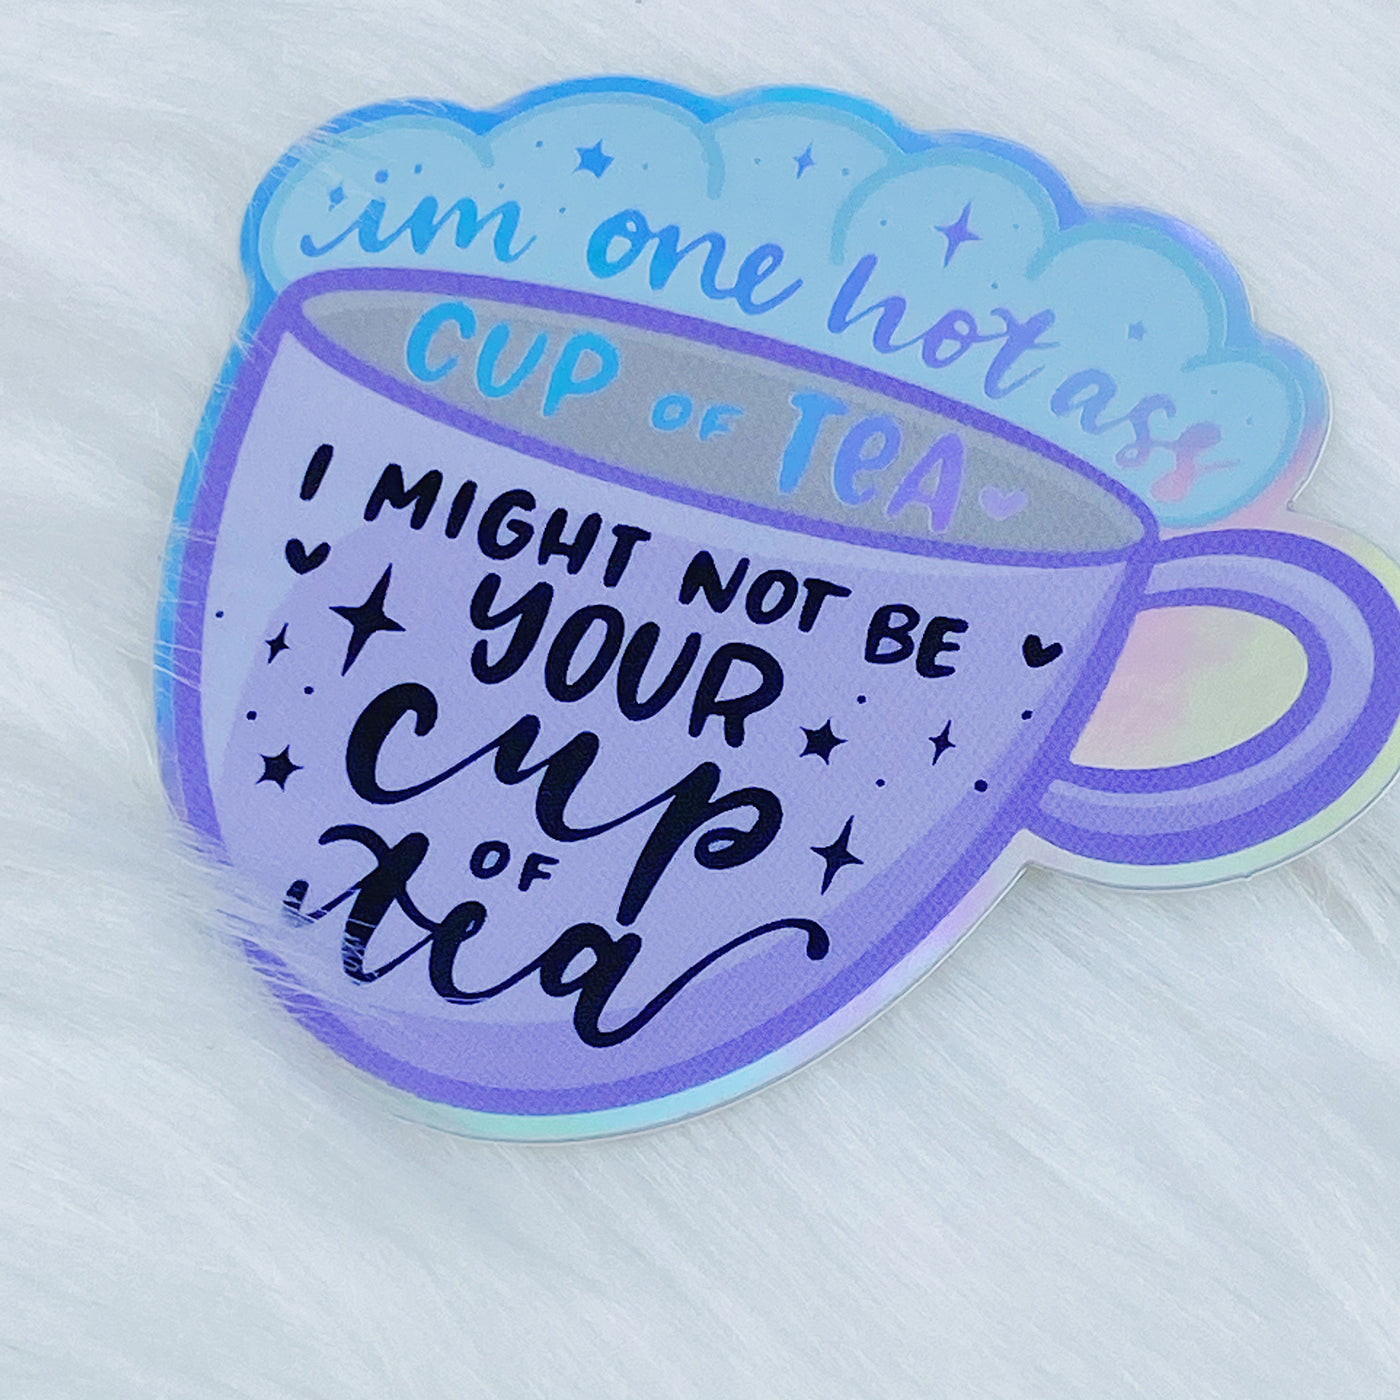 I Might Not Be Your Cup Of Tea [PURPLE] Holographic Vinyl Sticker Die Cut